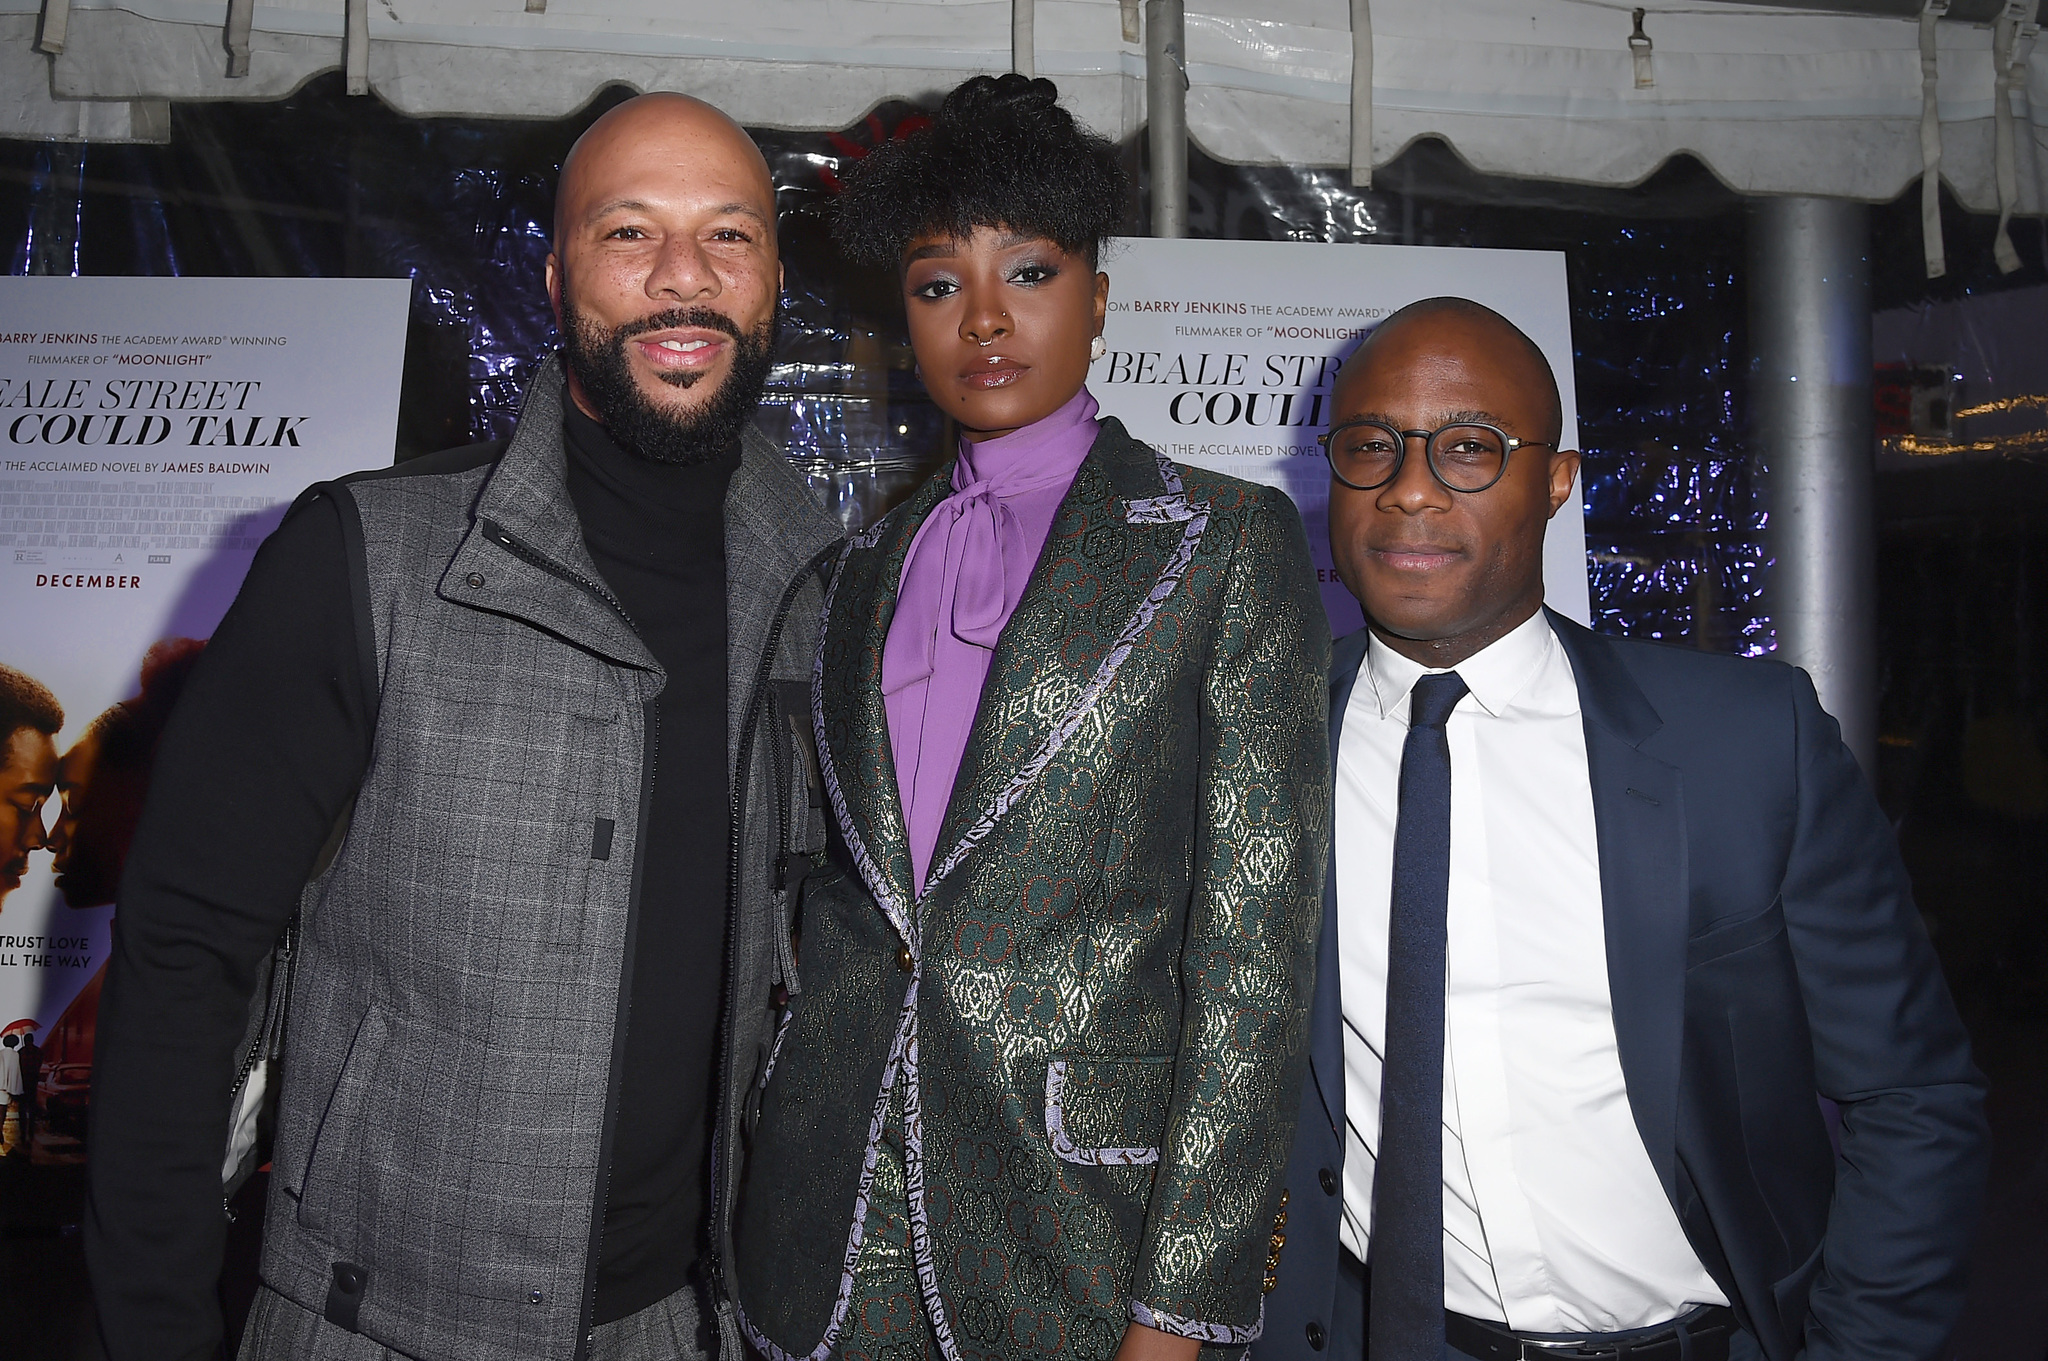 Common, Barry Jenkins, and KiKi Layne at an event for If Beale Street Could Talk (2018)